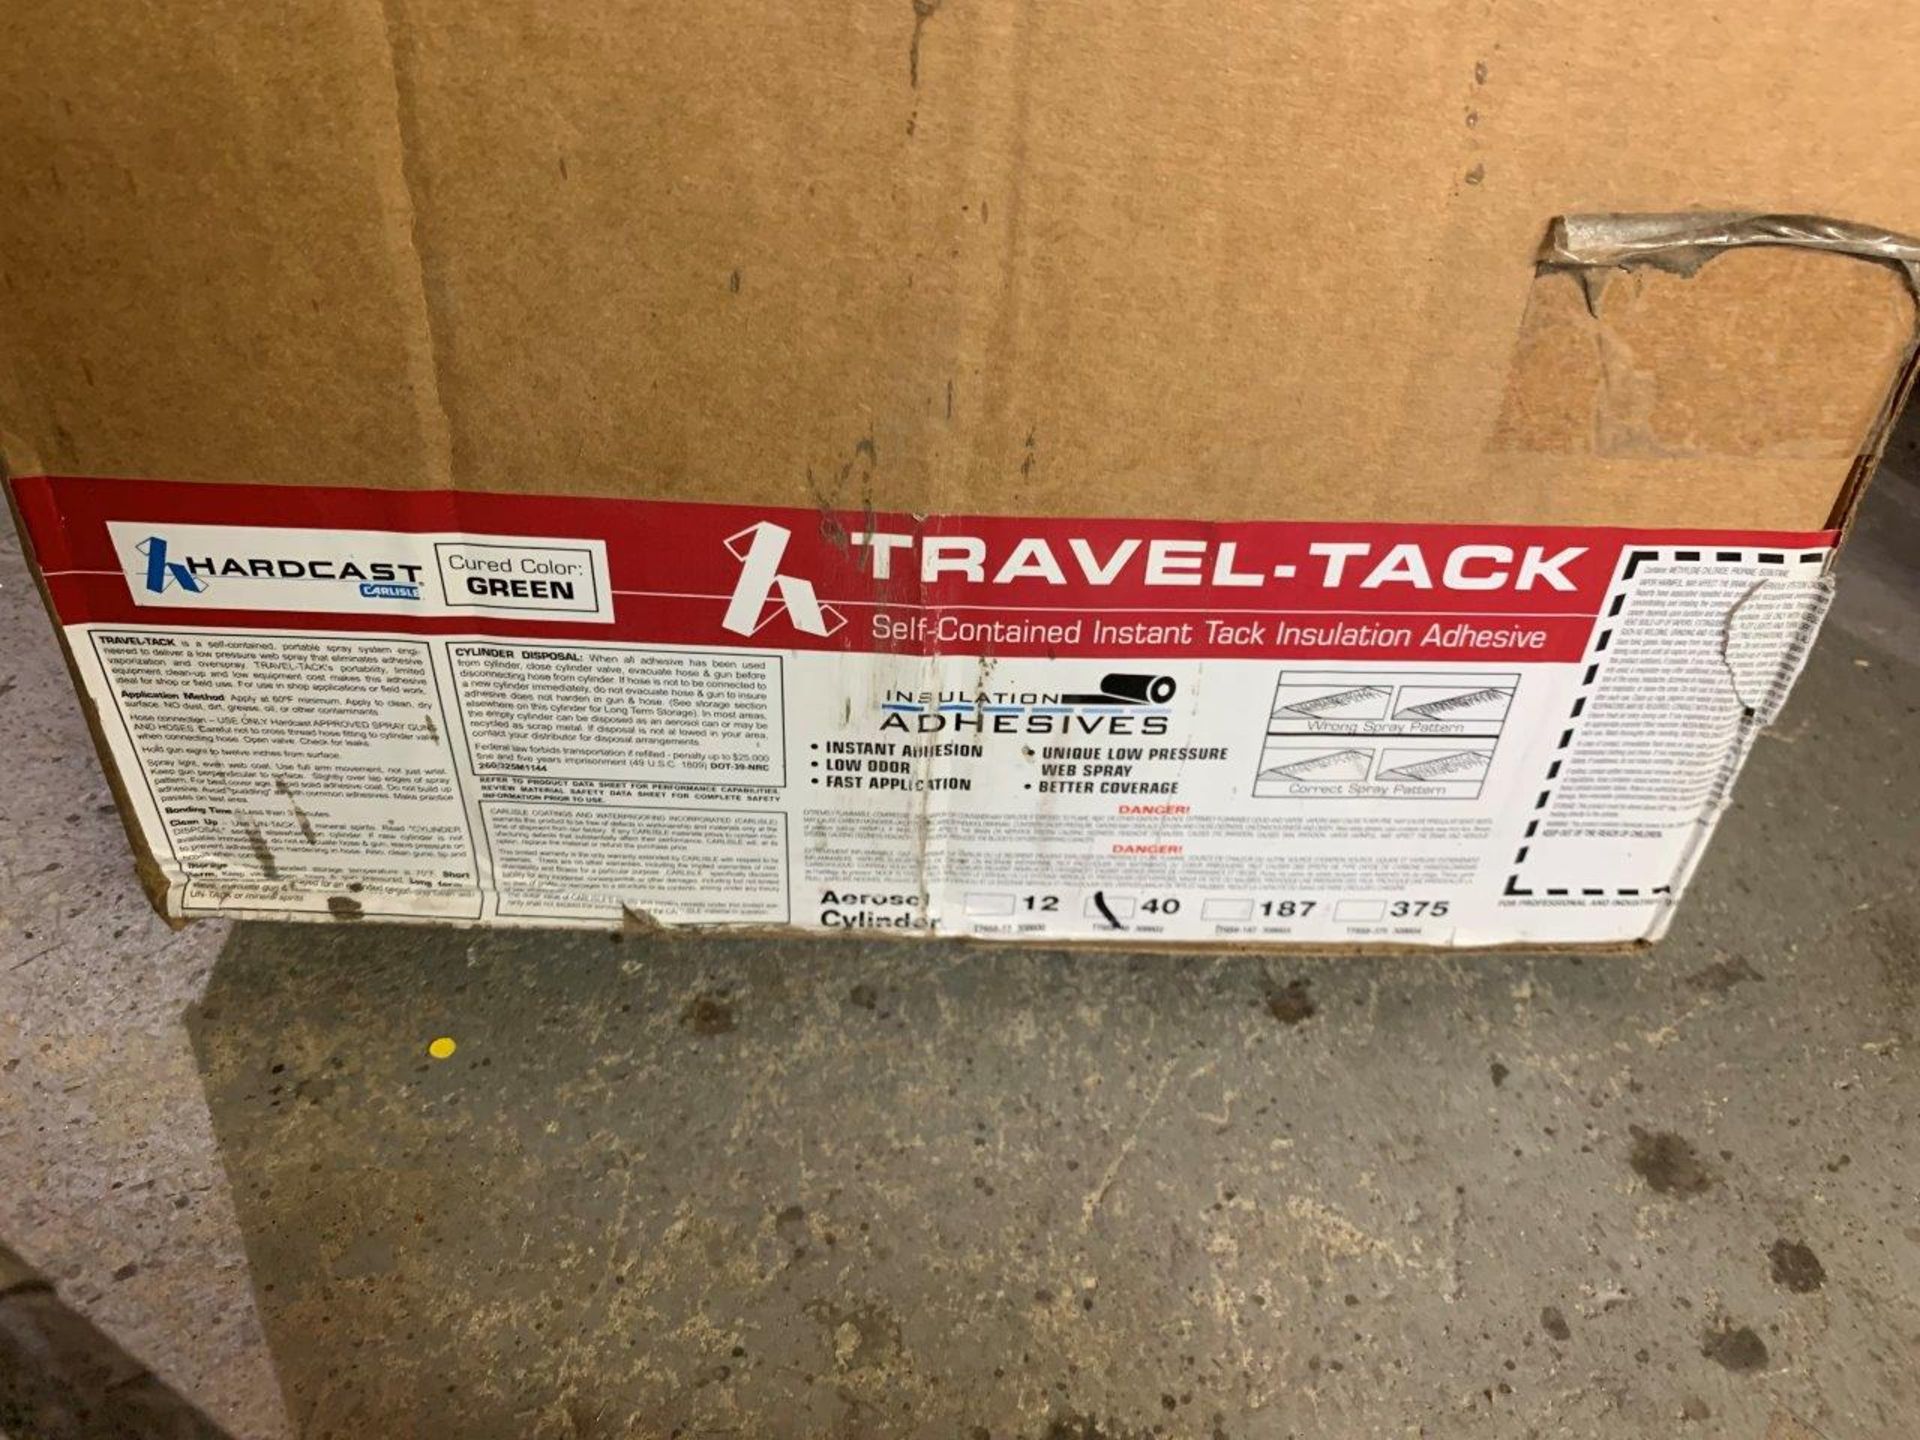 TRAVEL-TACK SELF CONTAINED INSTANT TACK INSULATION ADHESIVE W/ HOSE AND PISTOL GRIP APPLICATOR - Image 3 of 3